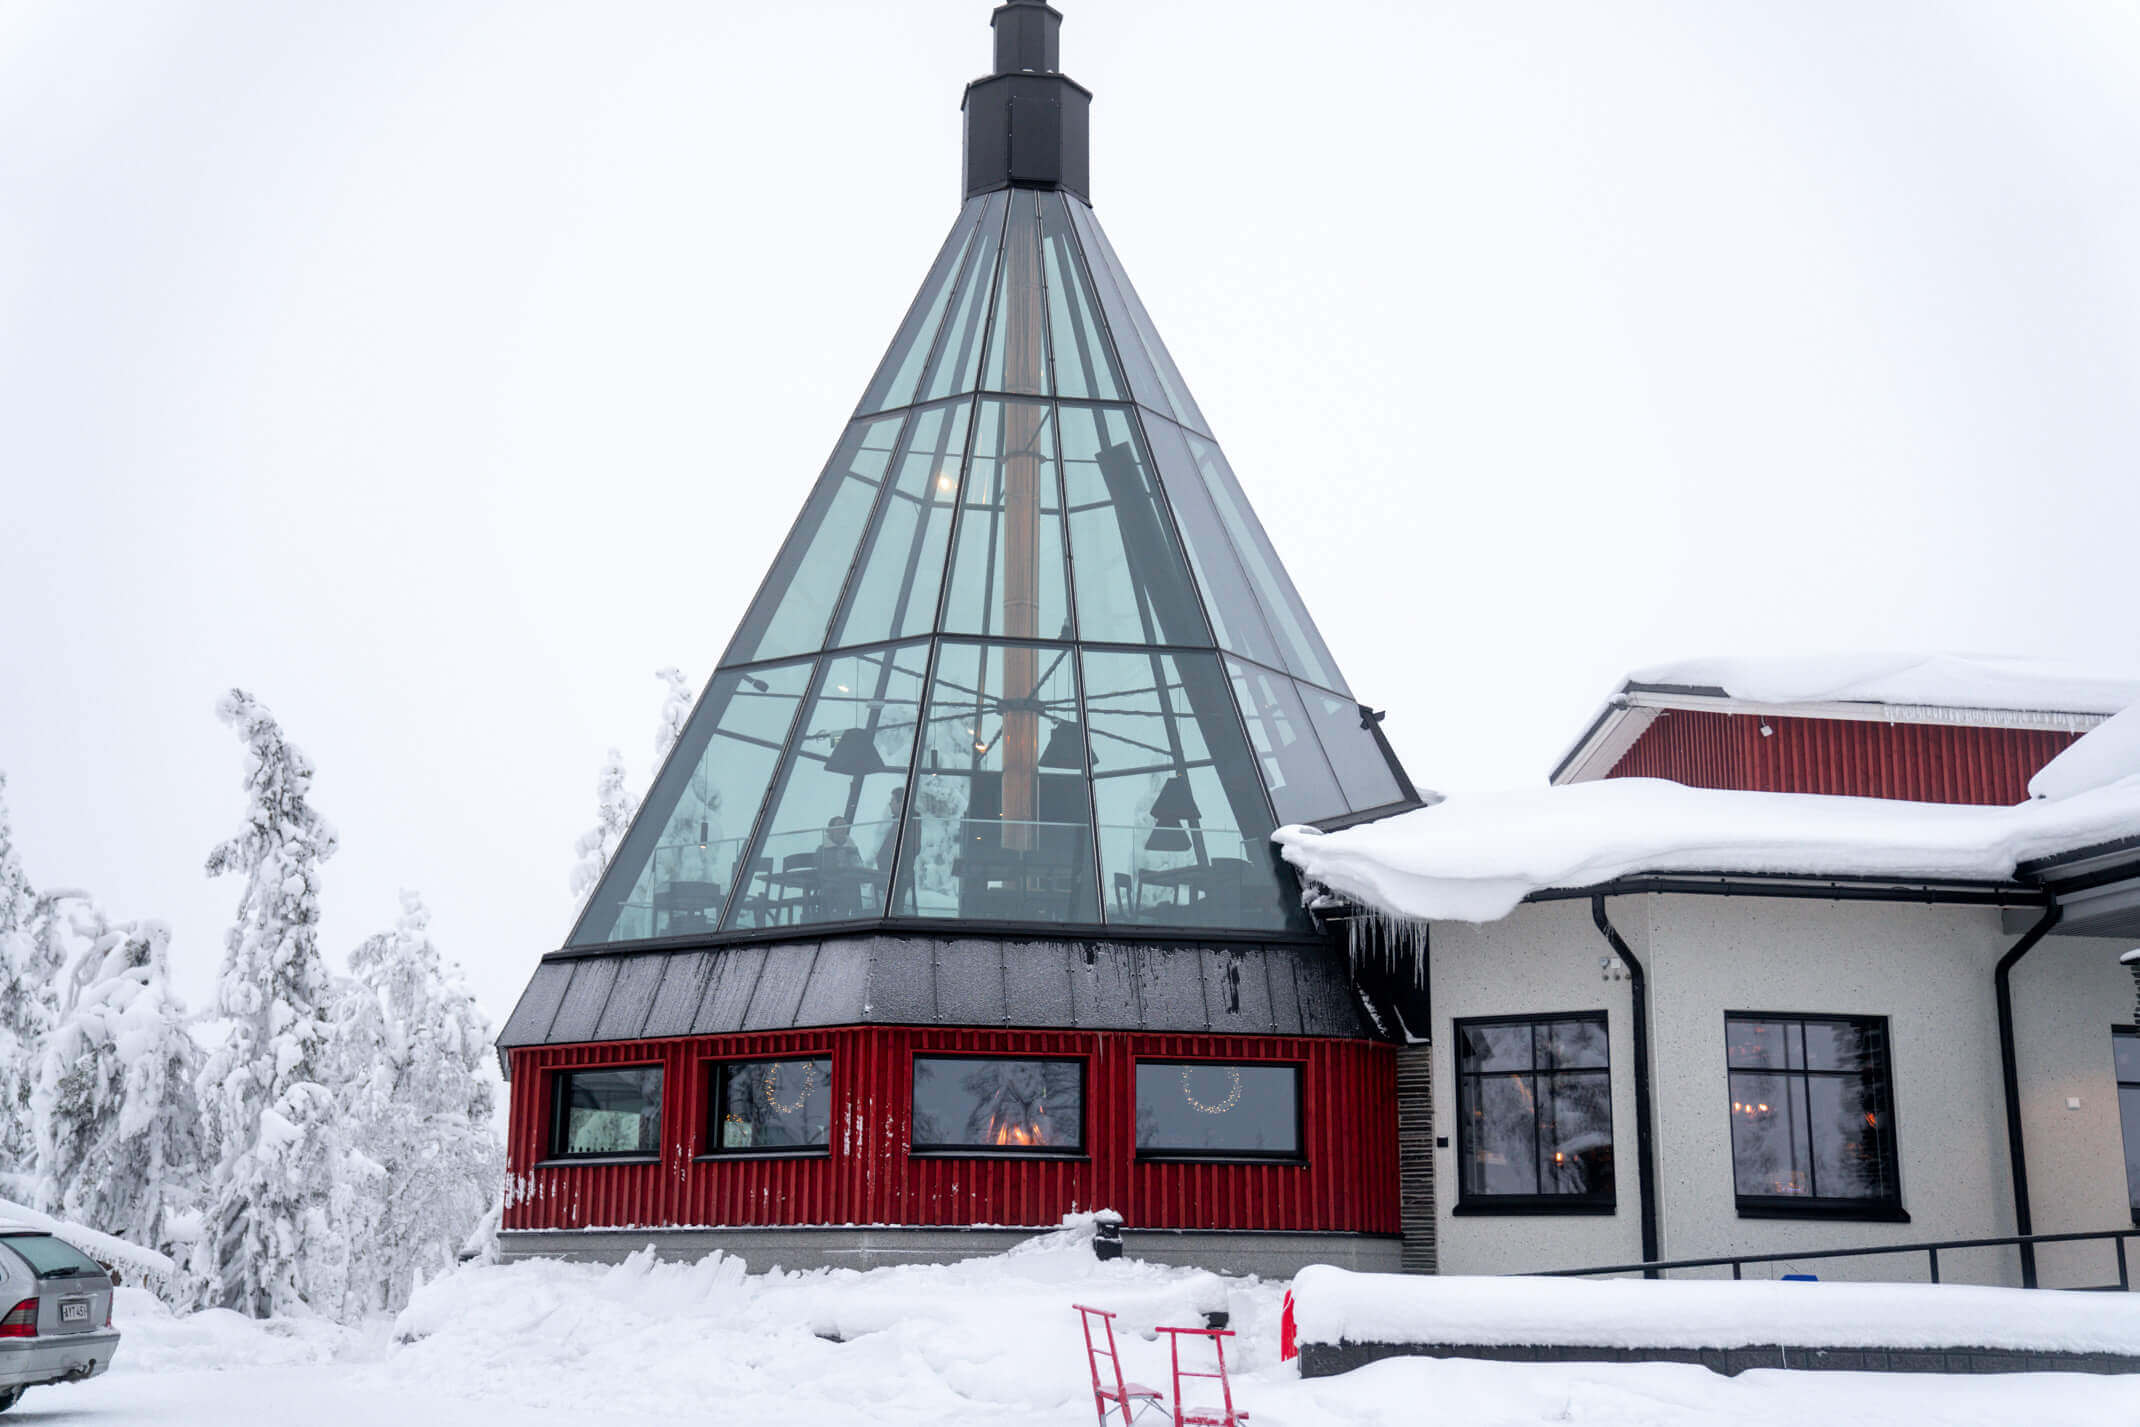 14 photos that will make you want to go to Finnish Lapland